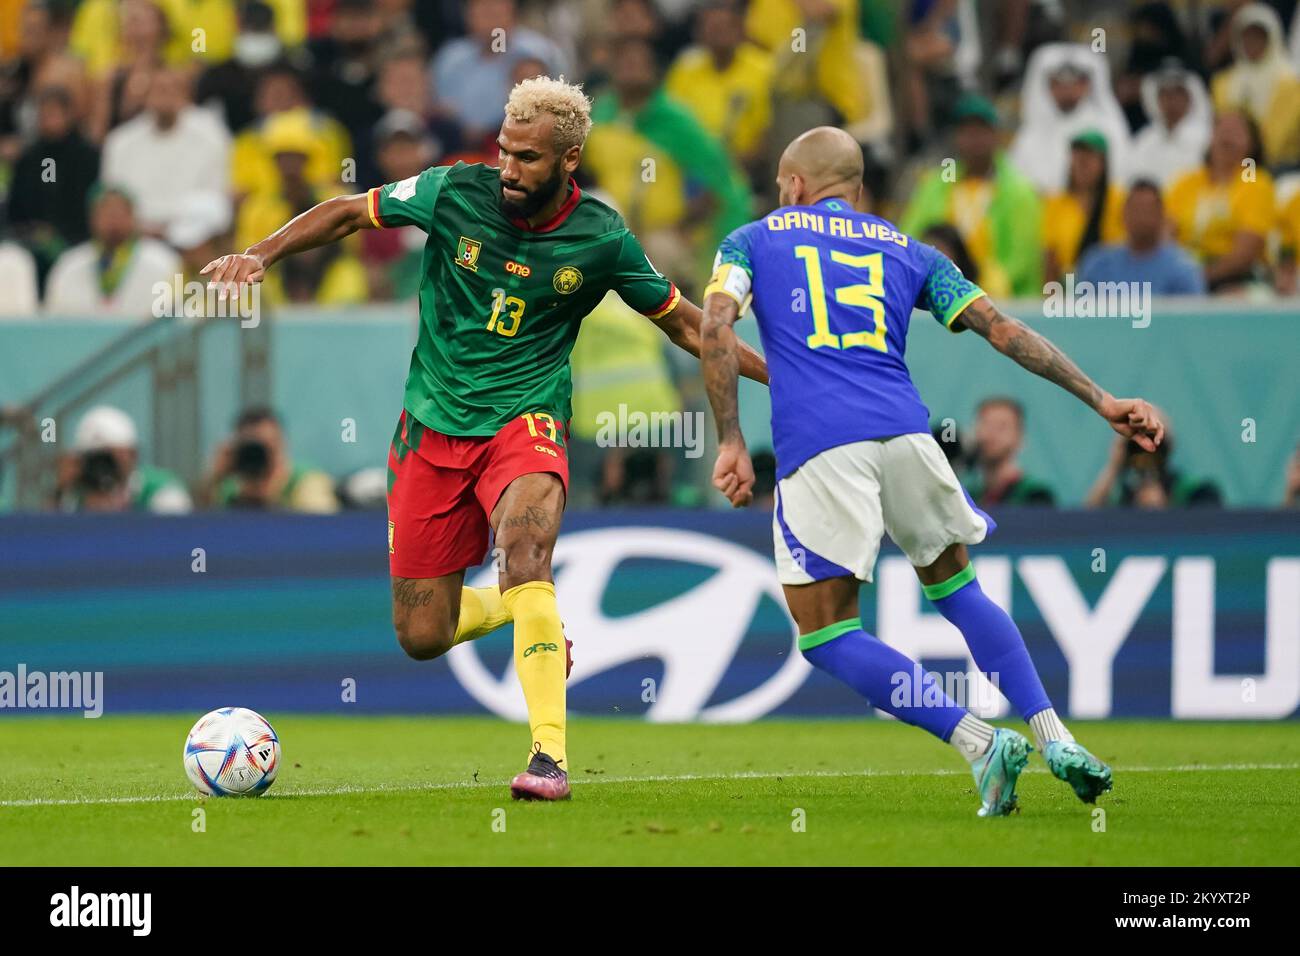 Lusail, Qatar. 02nd Dec, 2022. Lusail Stadium LUSAIL, QATAR - DECEMBER 2: Player of Cameroon Eric Maxim Choupo-Moting controls the ball under the pressure of Dani Alves during the FIFA World Cup Qatar 2022 group G match between Brazil and Cameroon at Lusail Stadium on December 2, 2022 in Lusail, Qatar. (Photo by Florencia Tan Jun/PxImages) (Florencia Tan Jun/SPP) Credit: SPP Sport Press Photo. /Alamy Live News Stock Photo